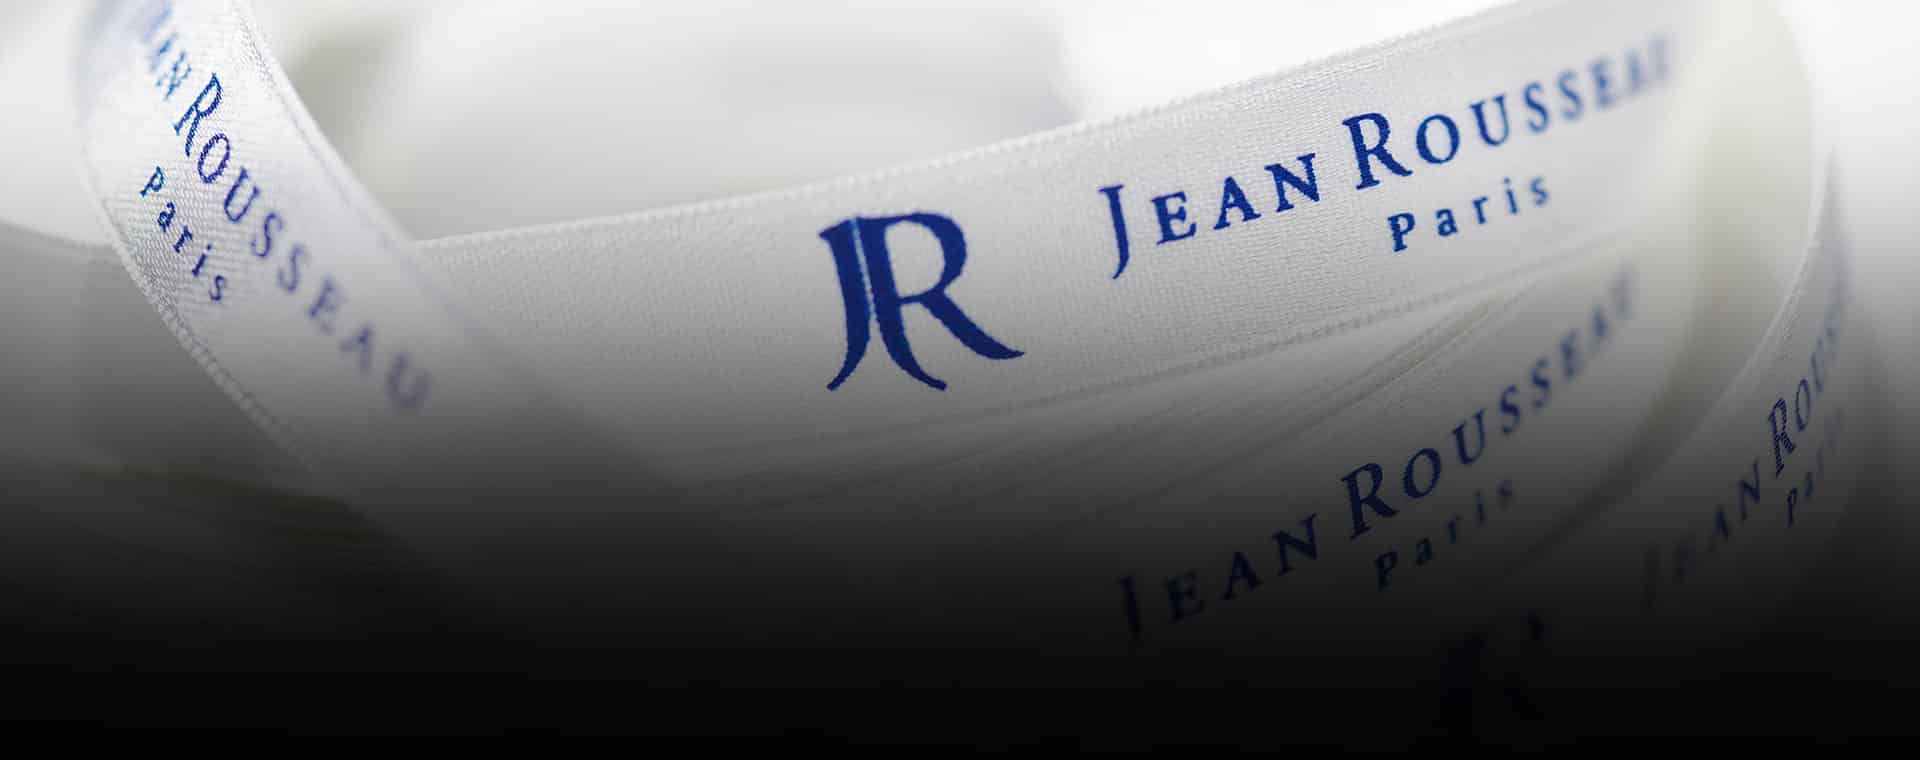 70 Years of History: The Journey of Maison Jean Rousseau